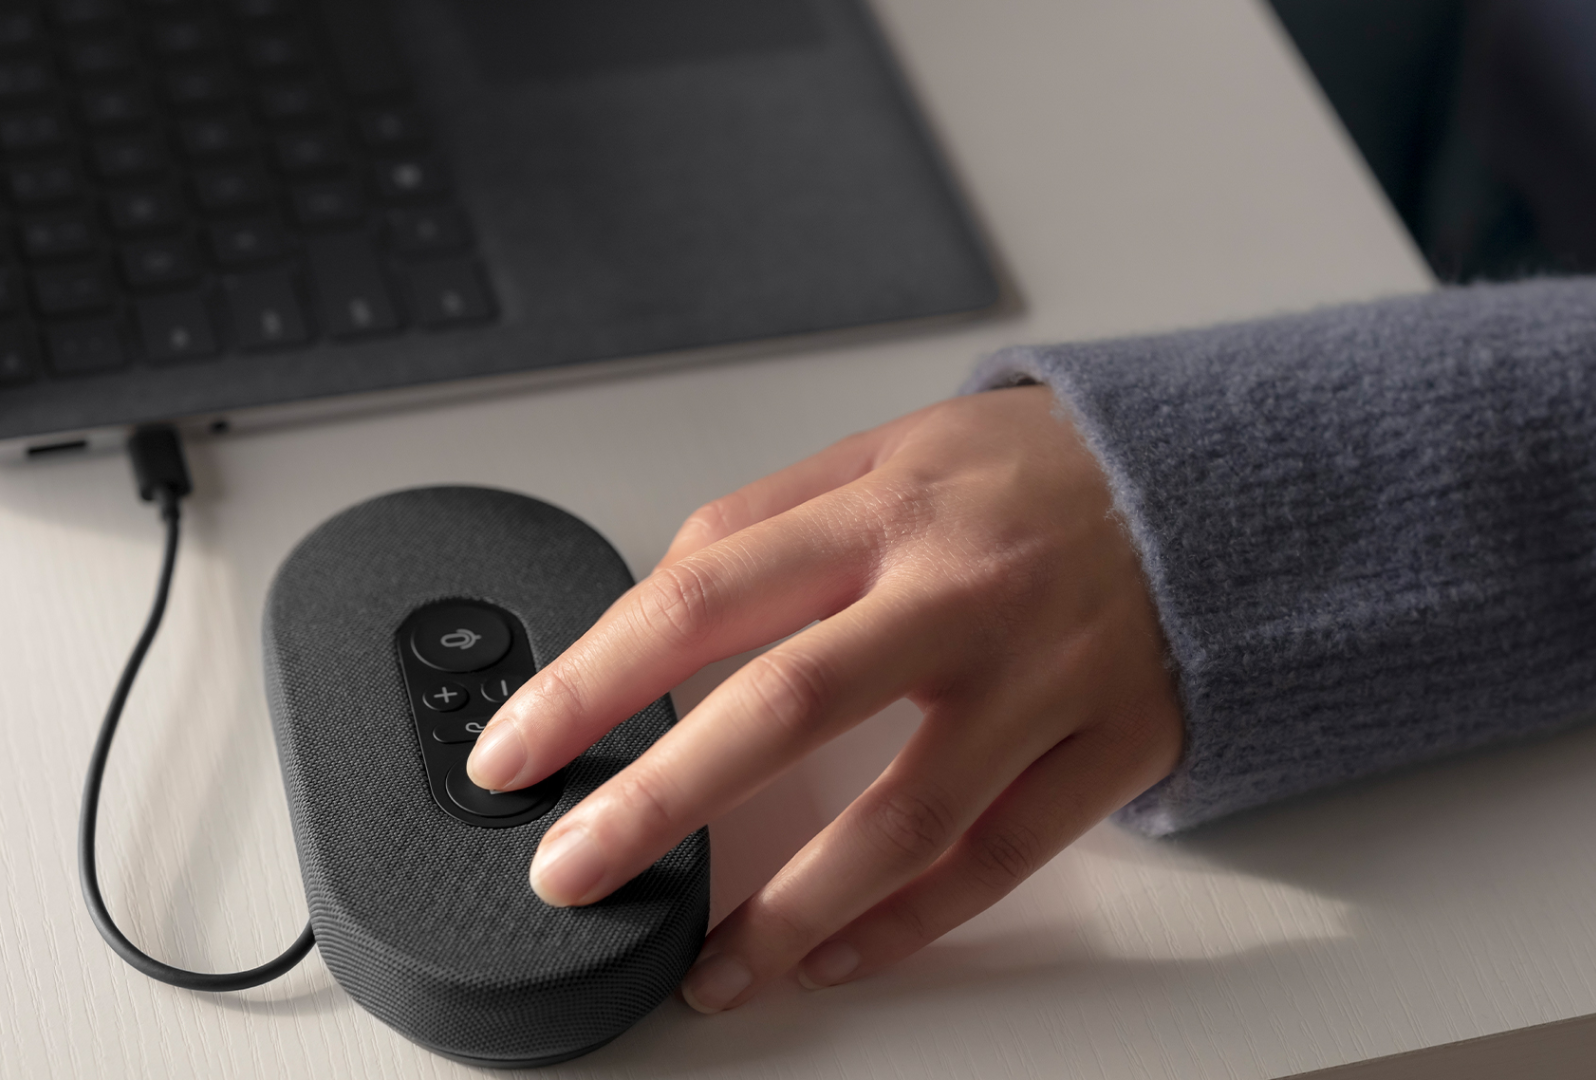 A person's hand is observed using the Microsoft USB-C Speaker to initiate a Microsoft Teams call